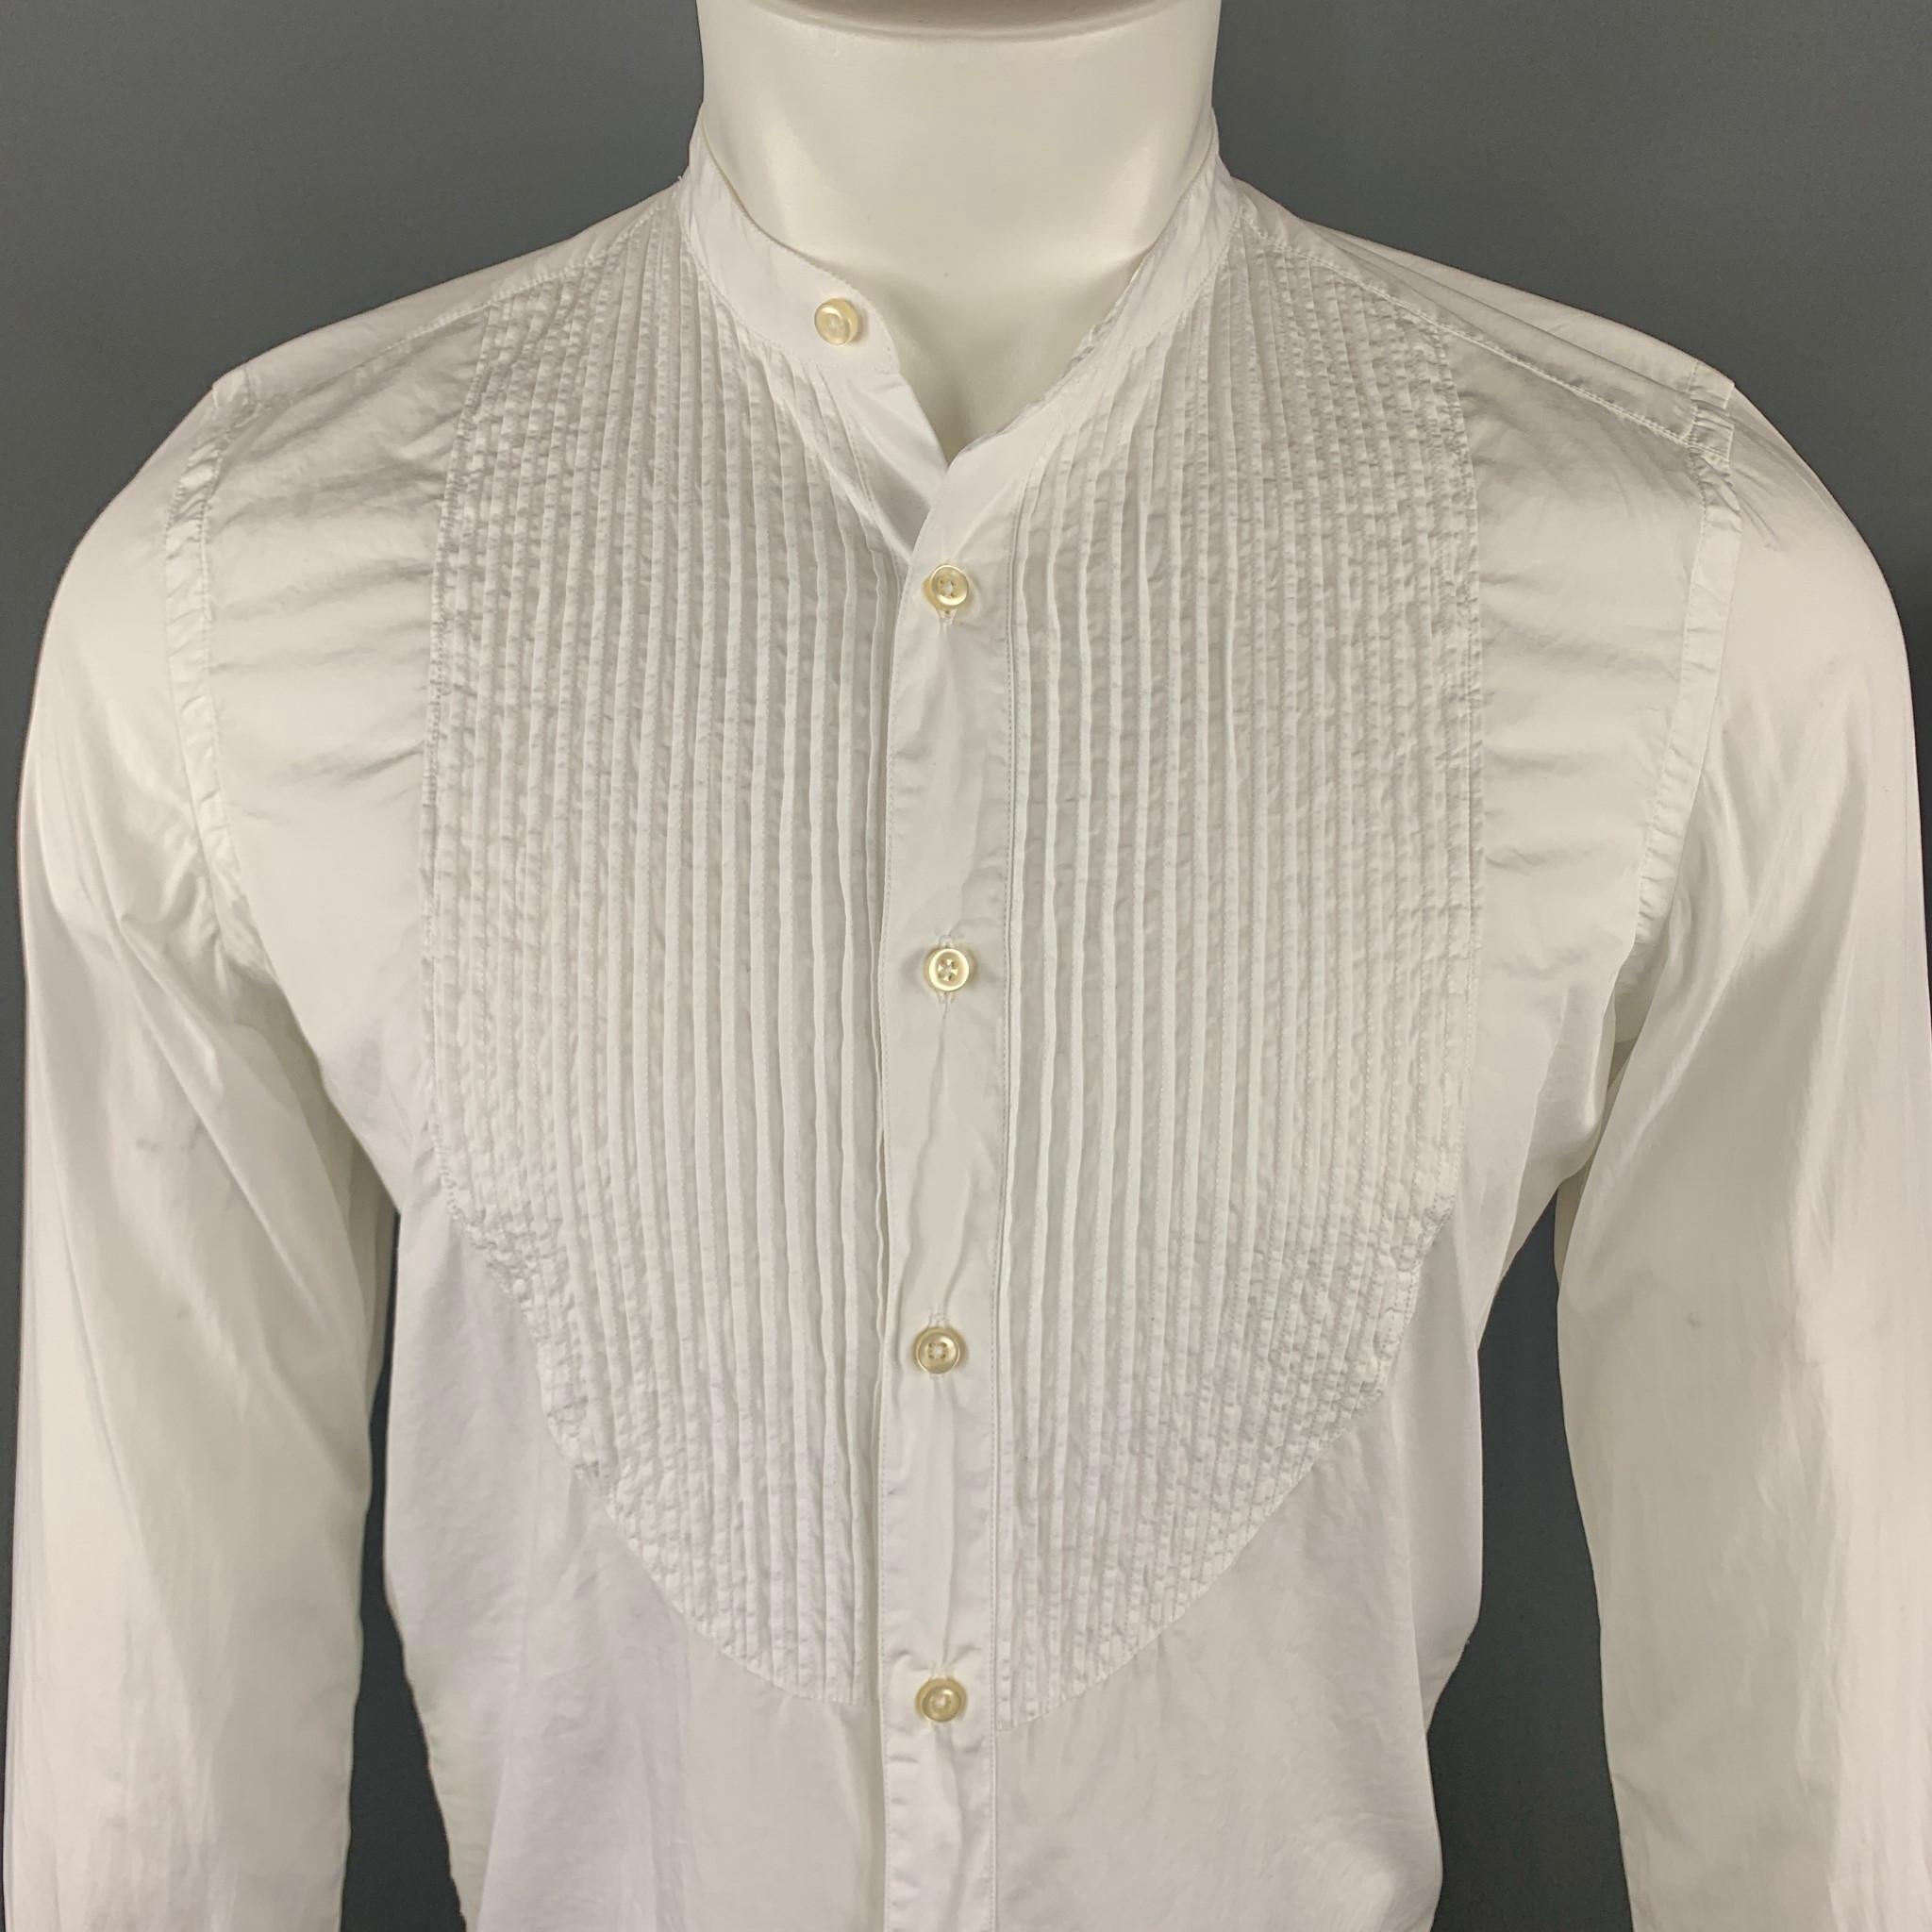 OFFICINE GENERALE Long Sleeve Shirt comes in a white solid cotton material, with a nehru collar, a pleated front, buttoned cuffs, button up. Made in Portugal.

Excellent Pre-Owned Condition.
Marked: S

Measurements:

Shoulder: 16 in. 
Chest: 41 in.